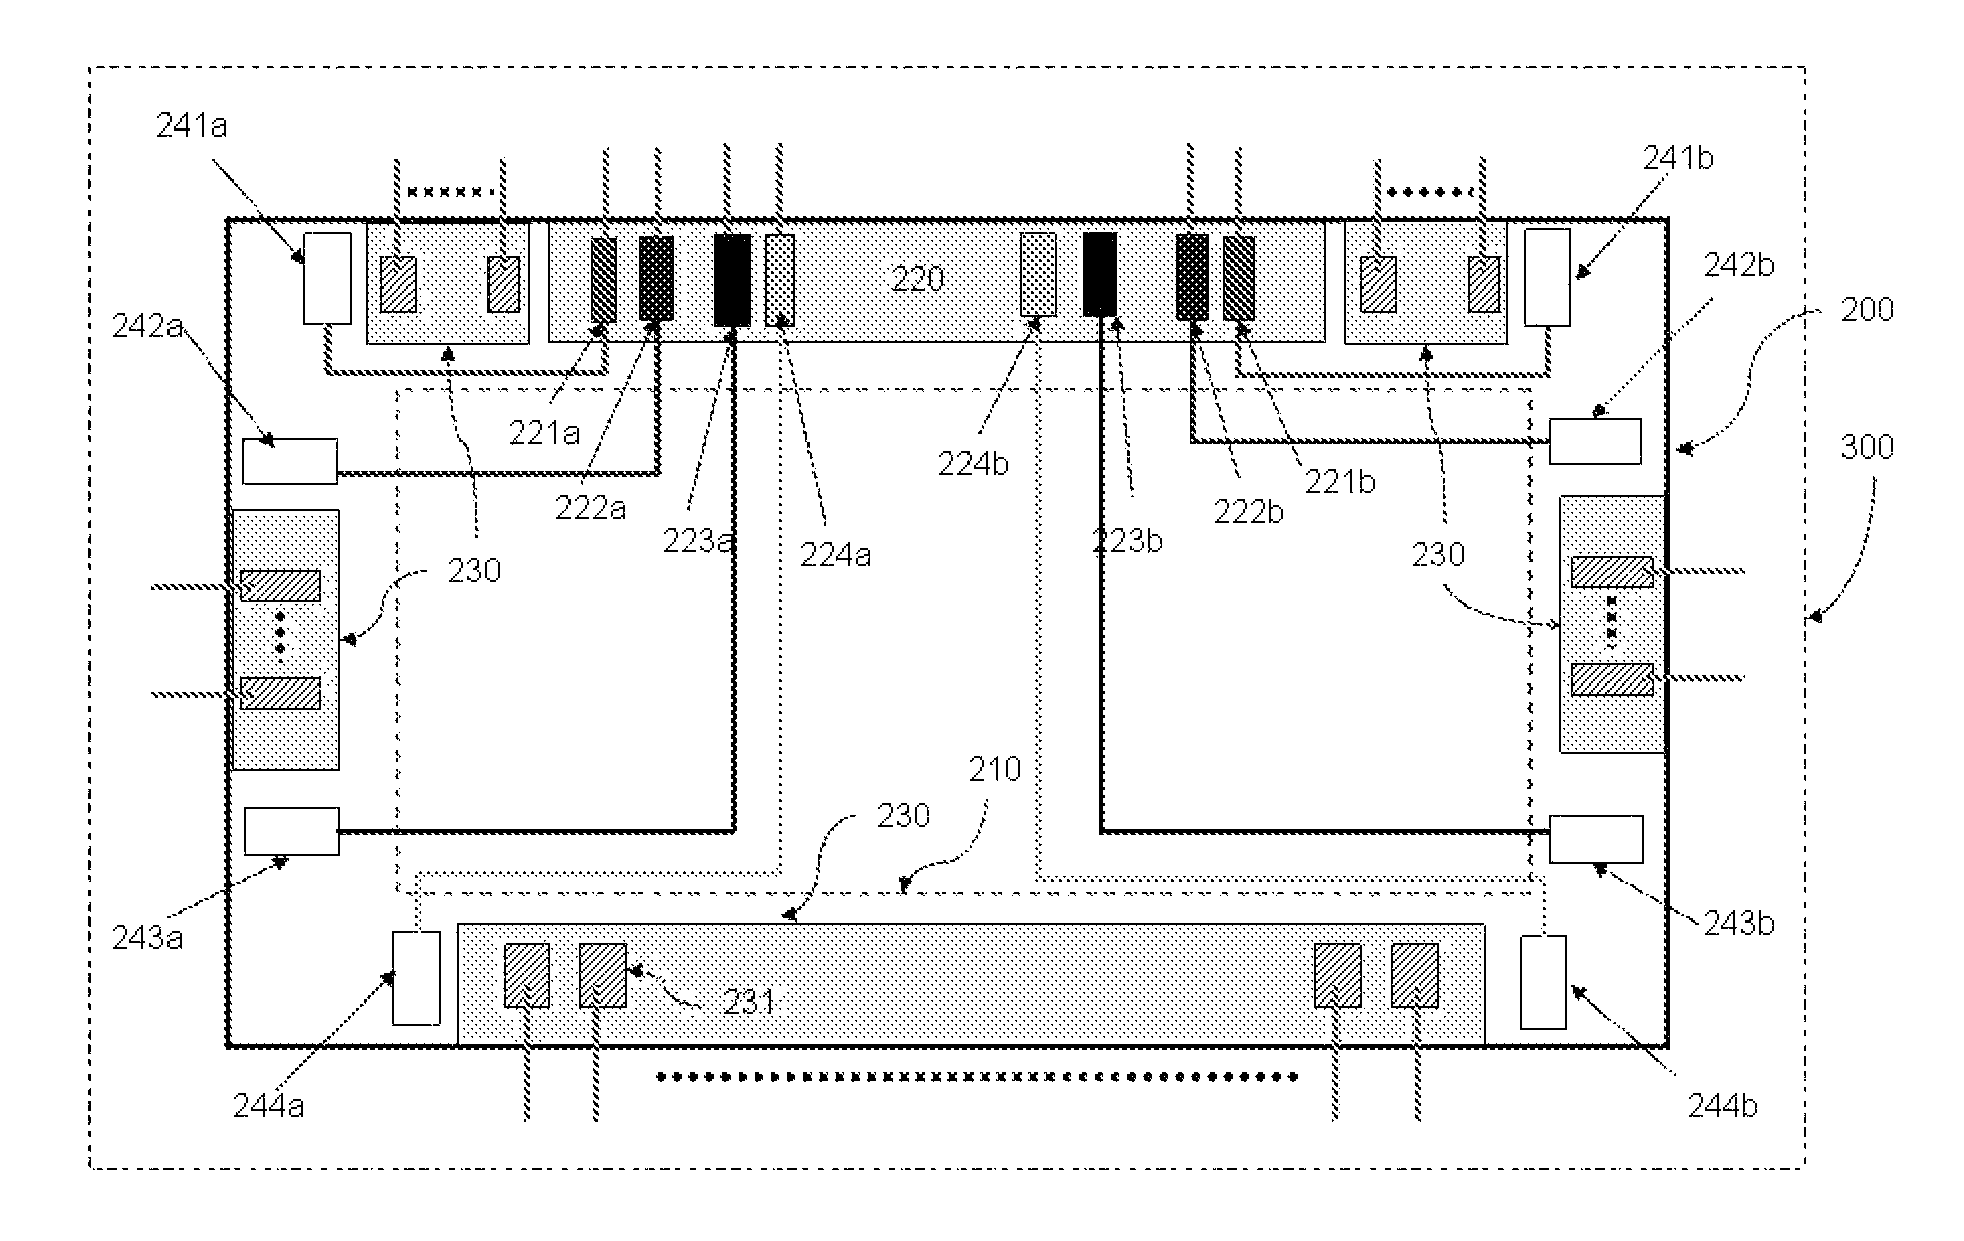 Pad layout structure of driver IC chip